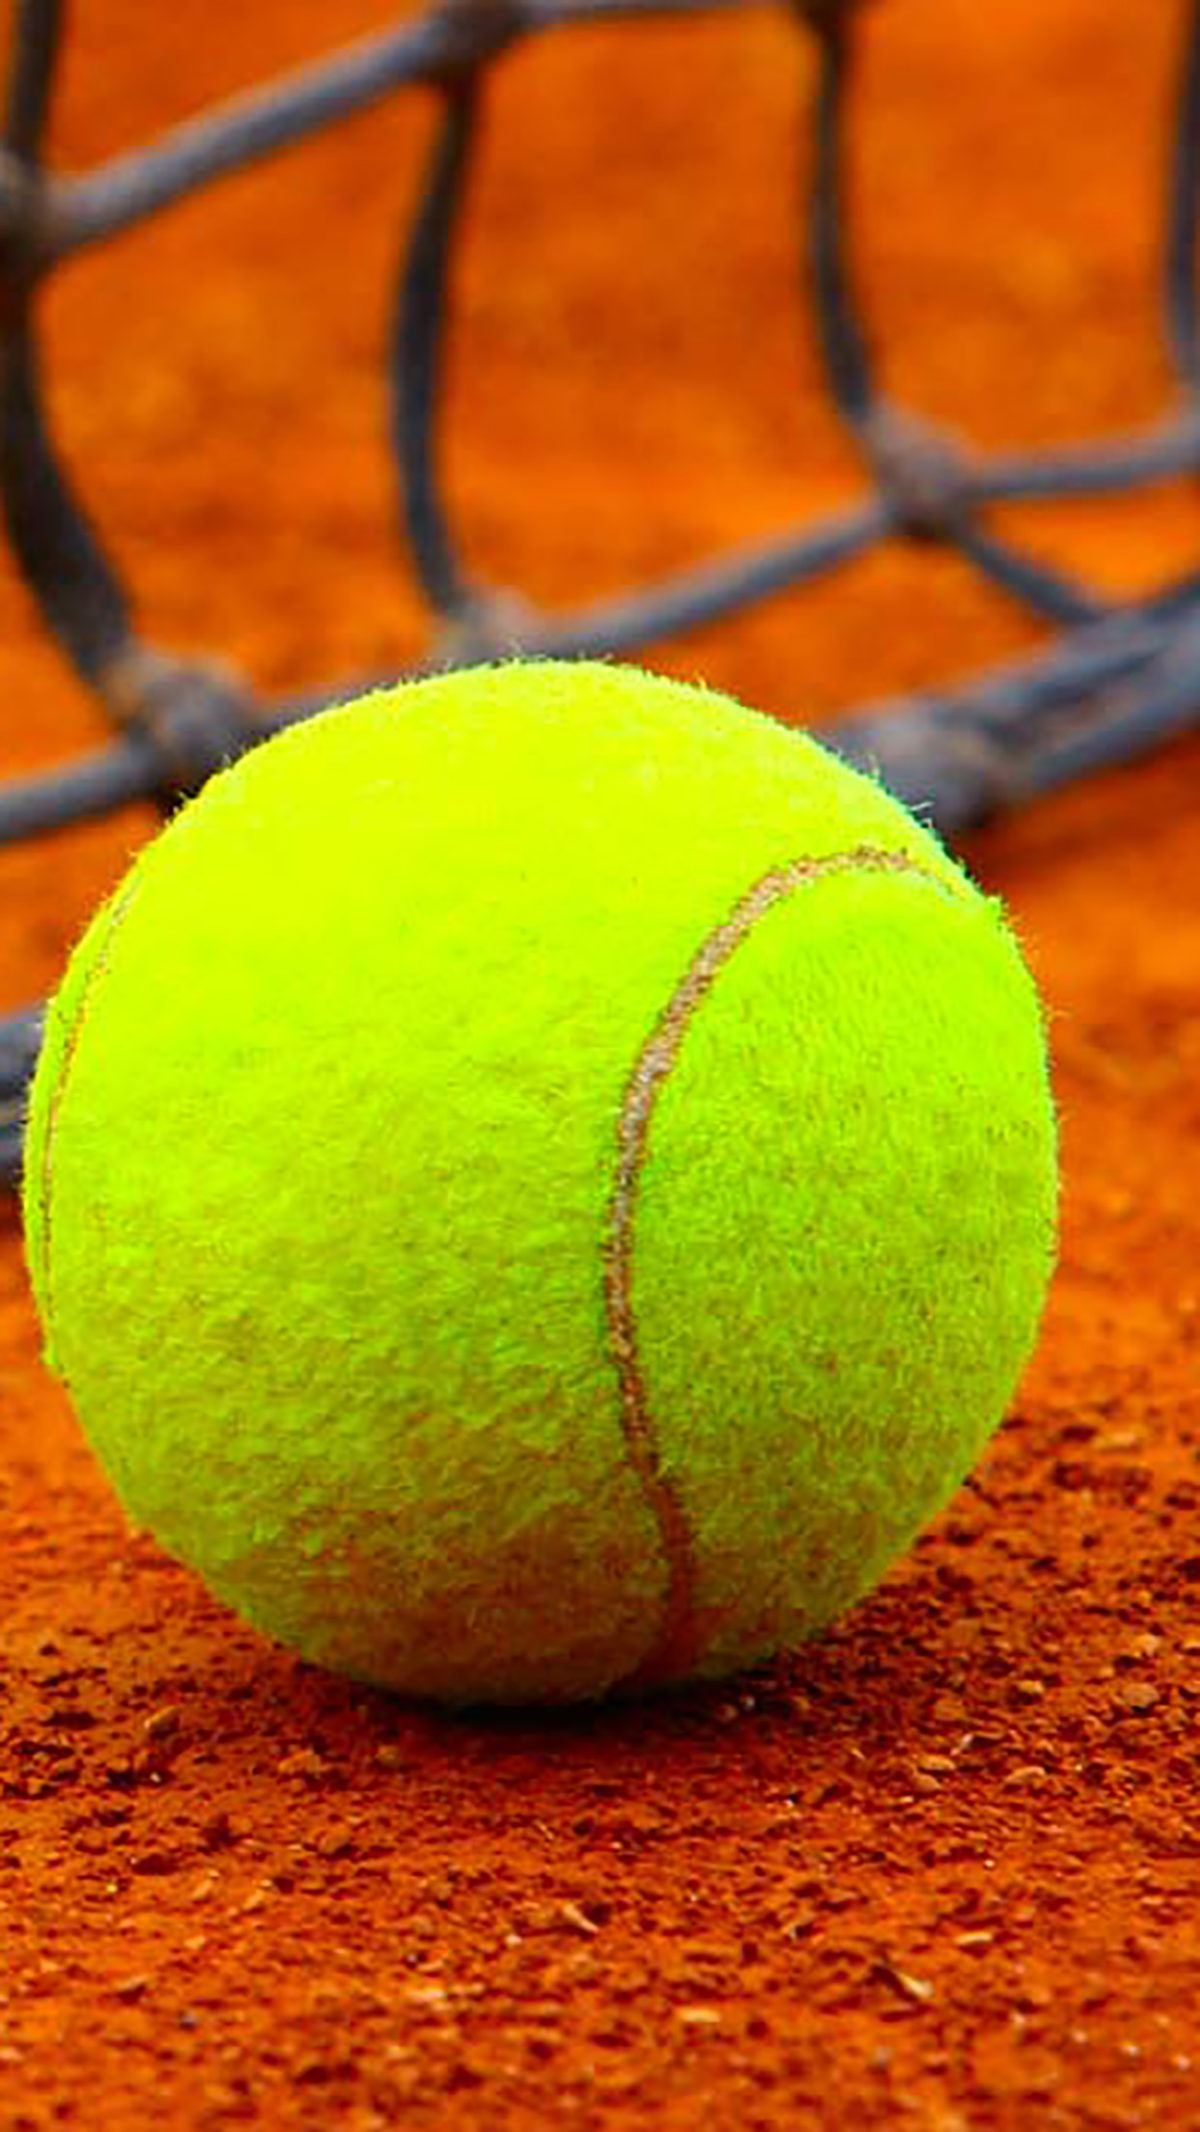 Tennis Ball On The Ground 3wallpapers Iphone Parallax